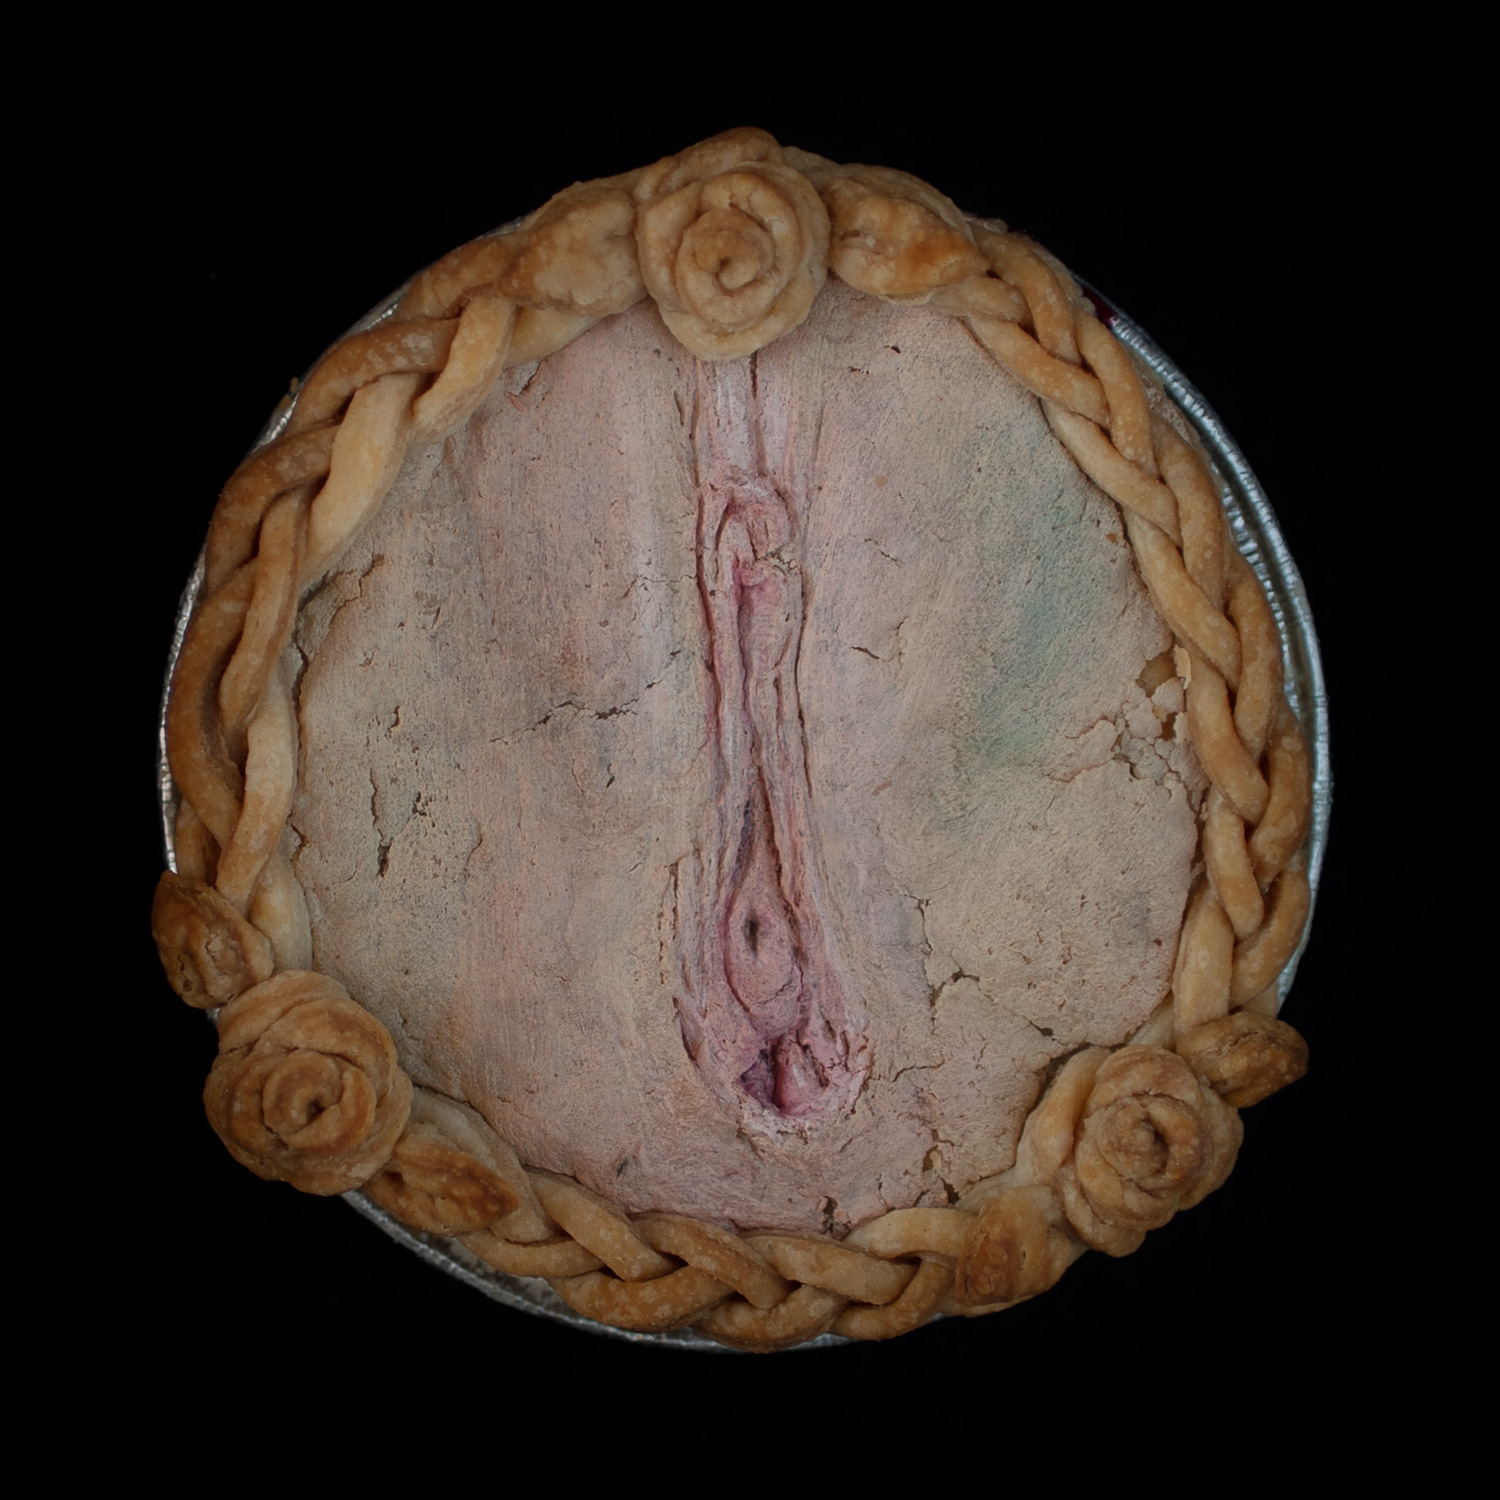 A baked pie with vulva pie crust art on a black background. 